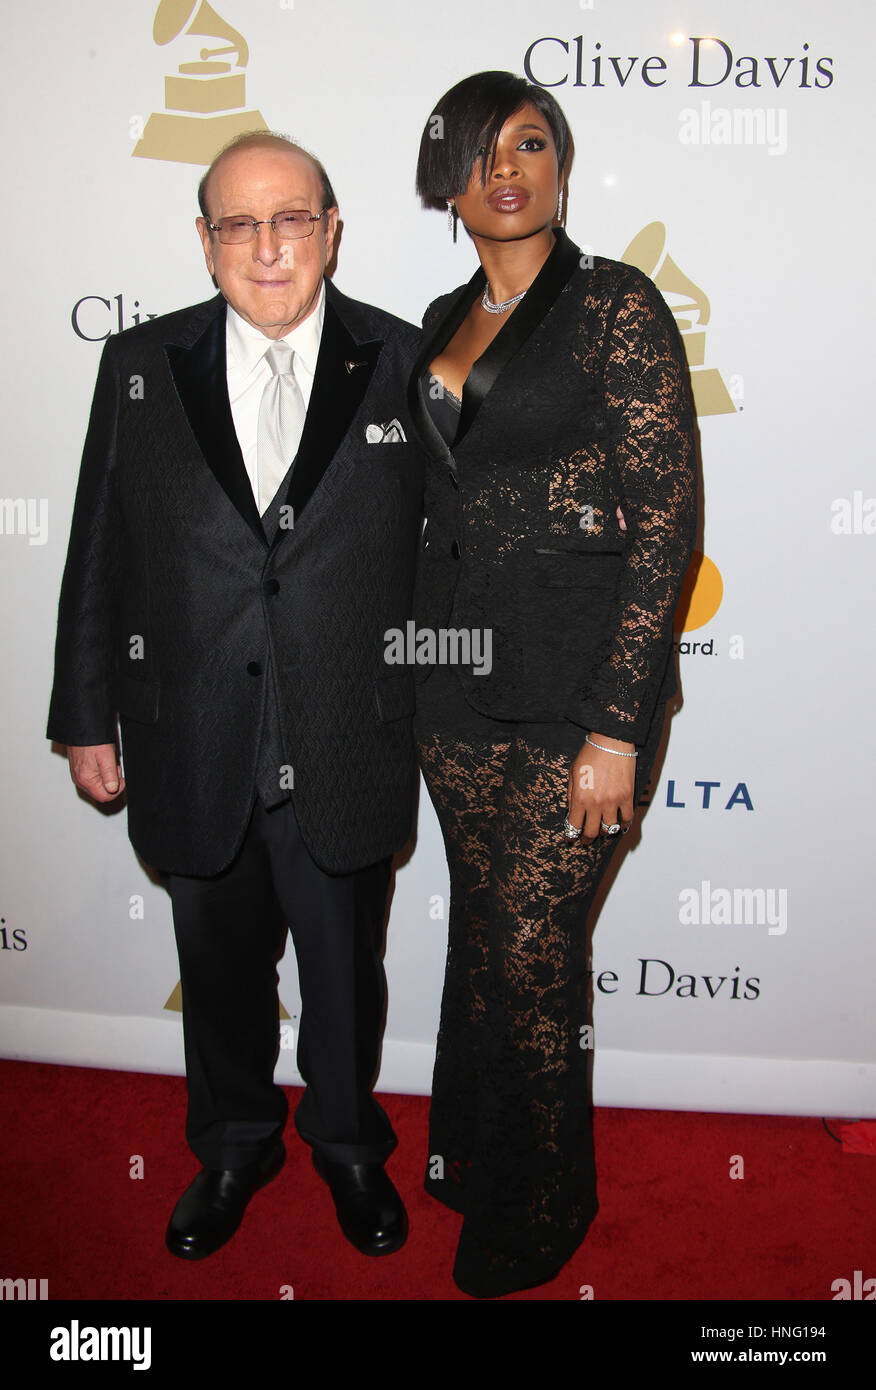 Beverly Hills, CA - February 11: Clive Davis, Jennifer Hudson, At Pre-GRAMMY Gala and Salute to Industry Icons Honoring Debra Lee, At The Beverly Hilton Hotel In California on February 11, 2017. Stock Photo